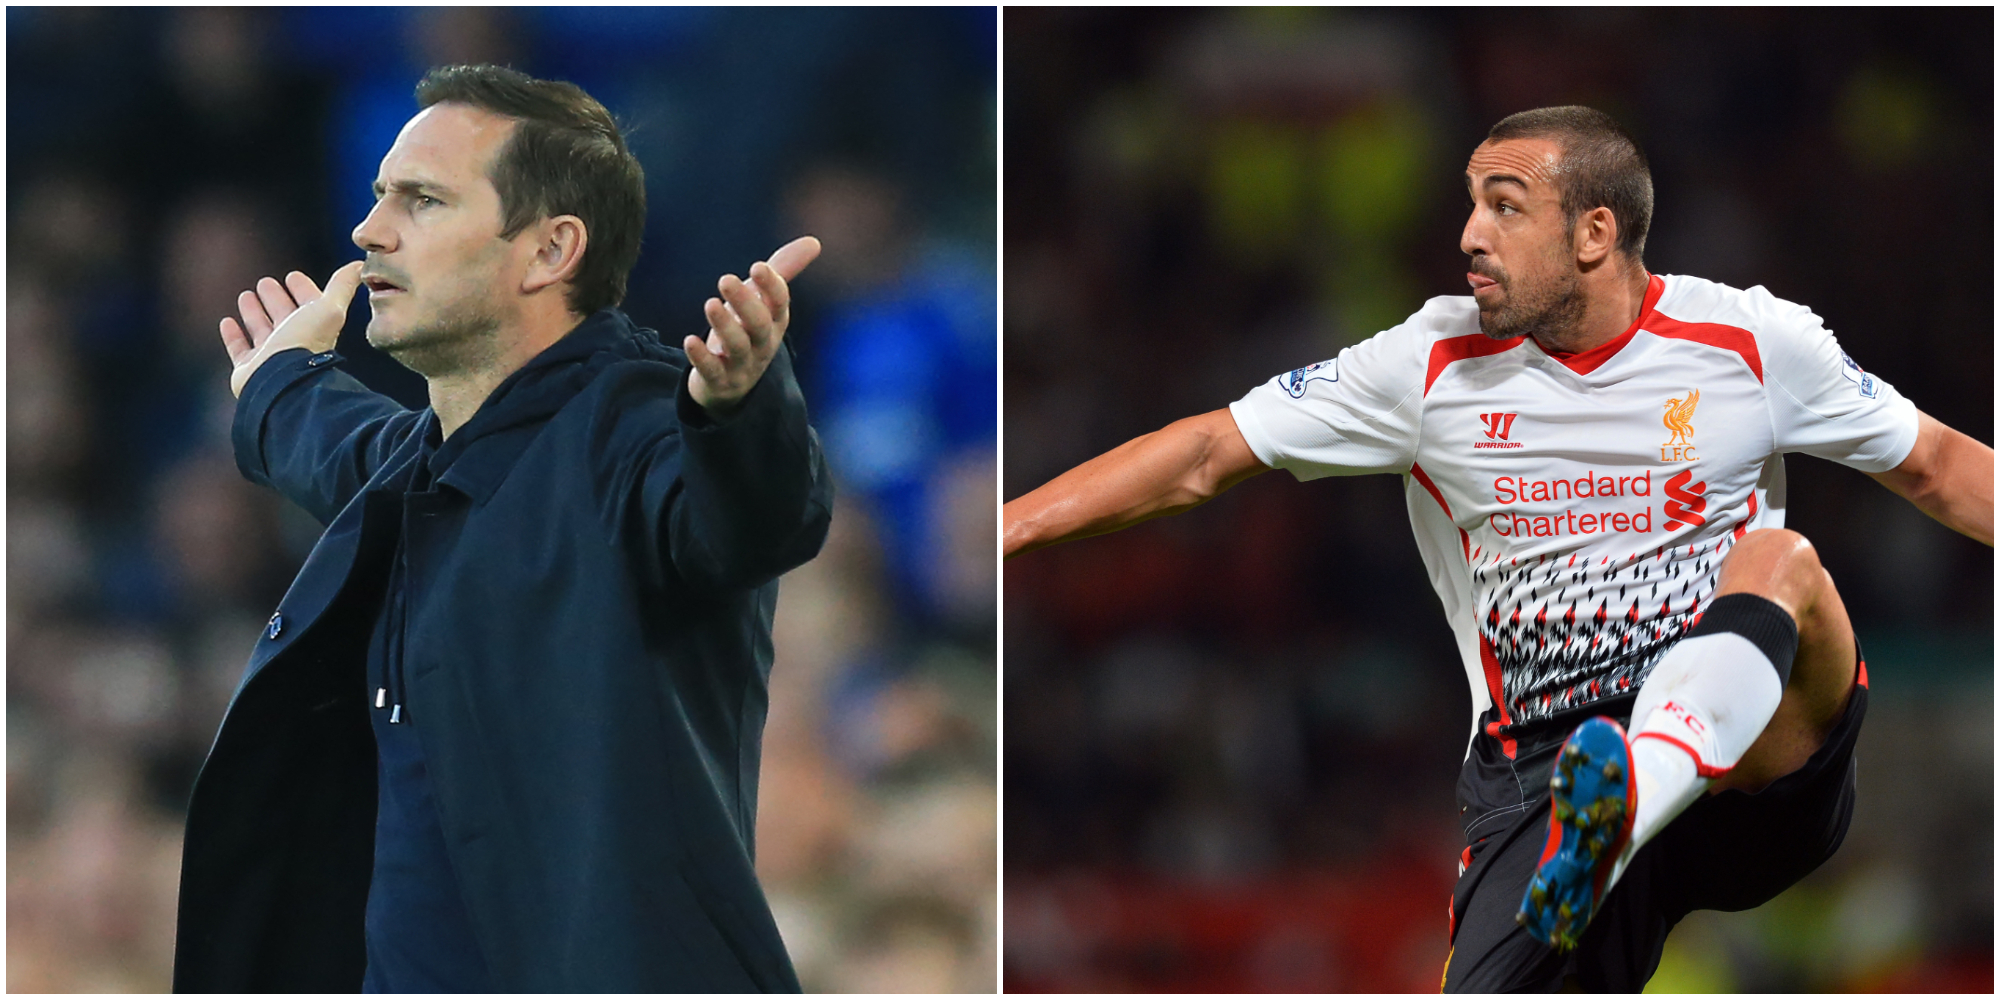 ‘To Frank Lampard’ – Jose Enrique hits out at Everton boss over ludicrous Anfield complaint